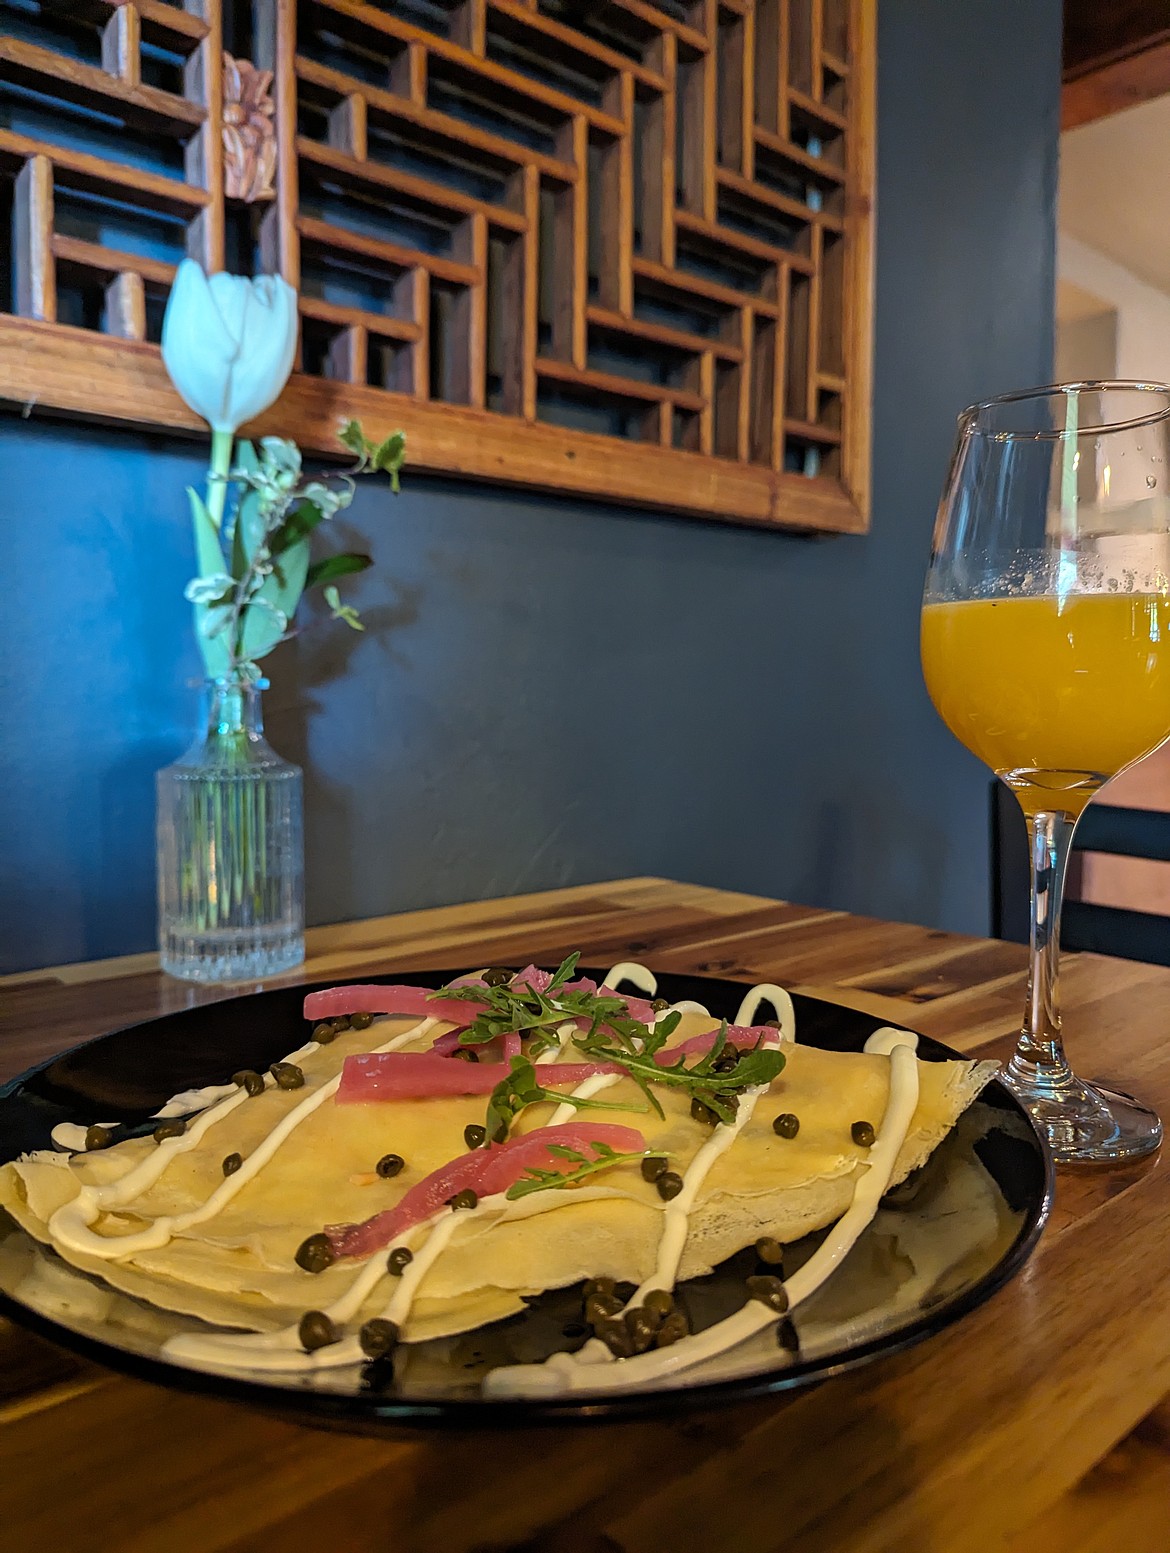 Crêpes are on offer at Nocturn in Kellogg on Saturdays and Sundays.